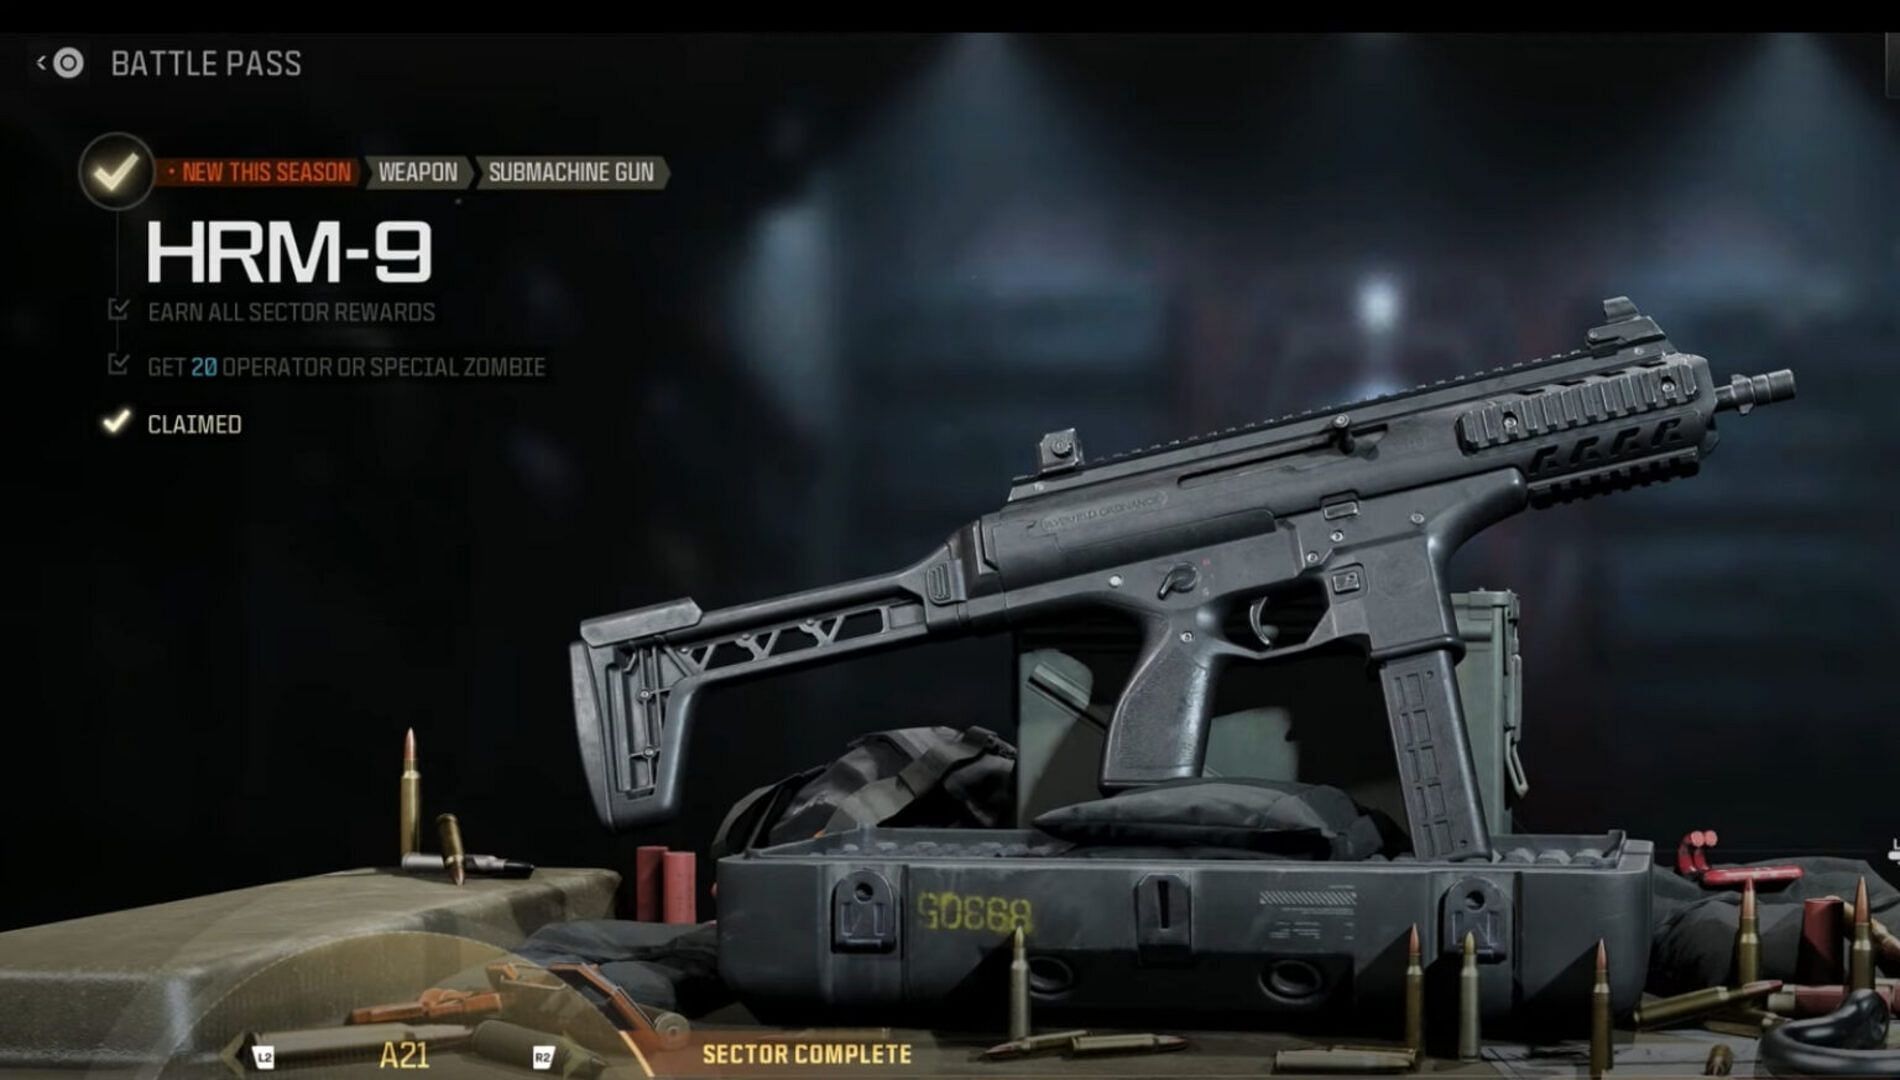 HRM-9 is a battle pass unlock in Modern Warfare 3 and Warzone (Image via Activision)